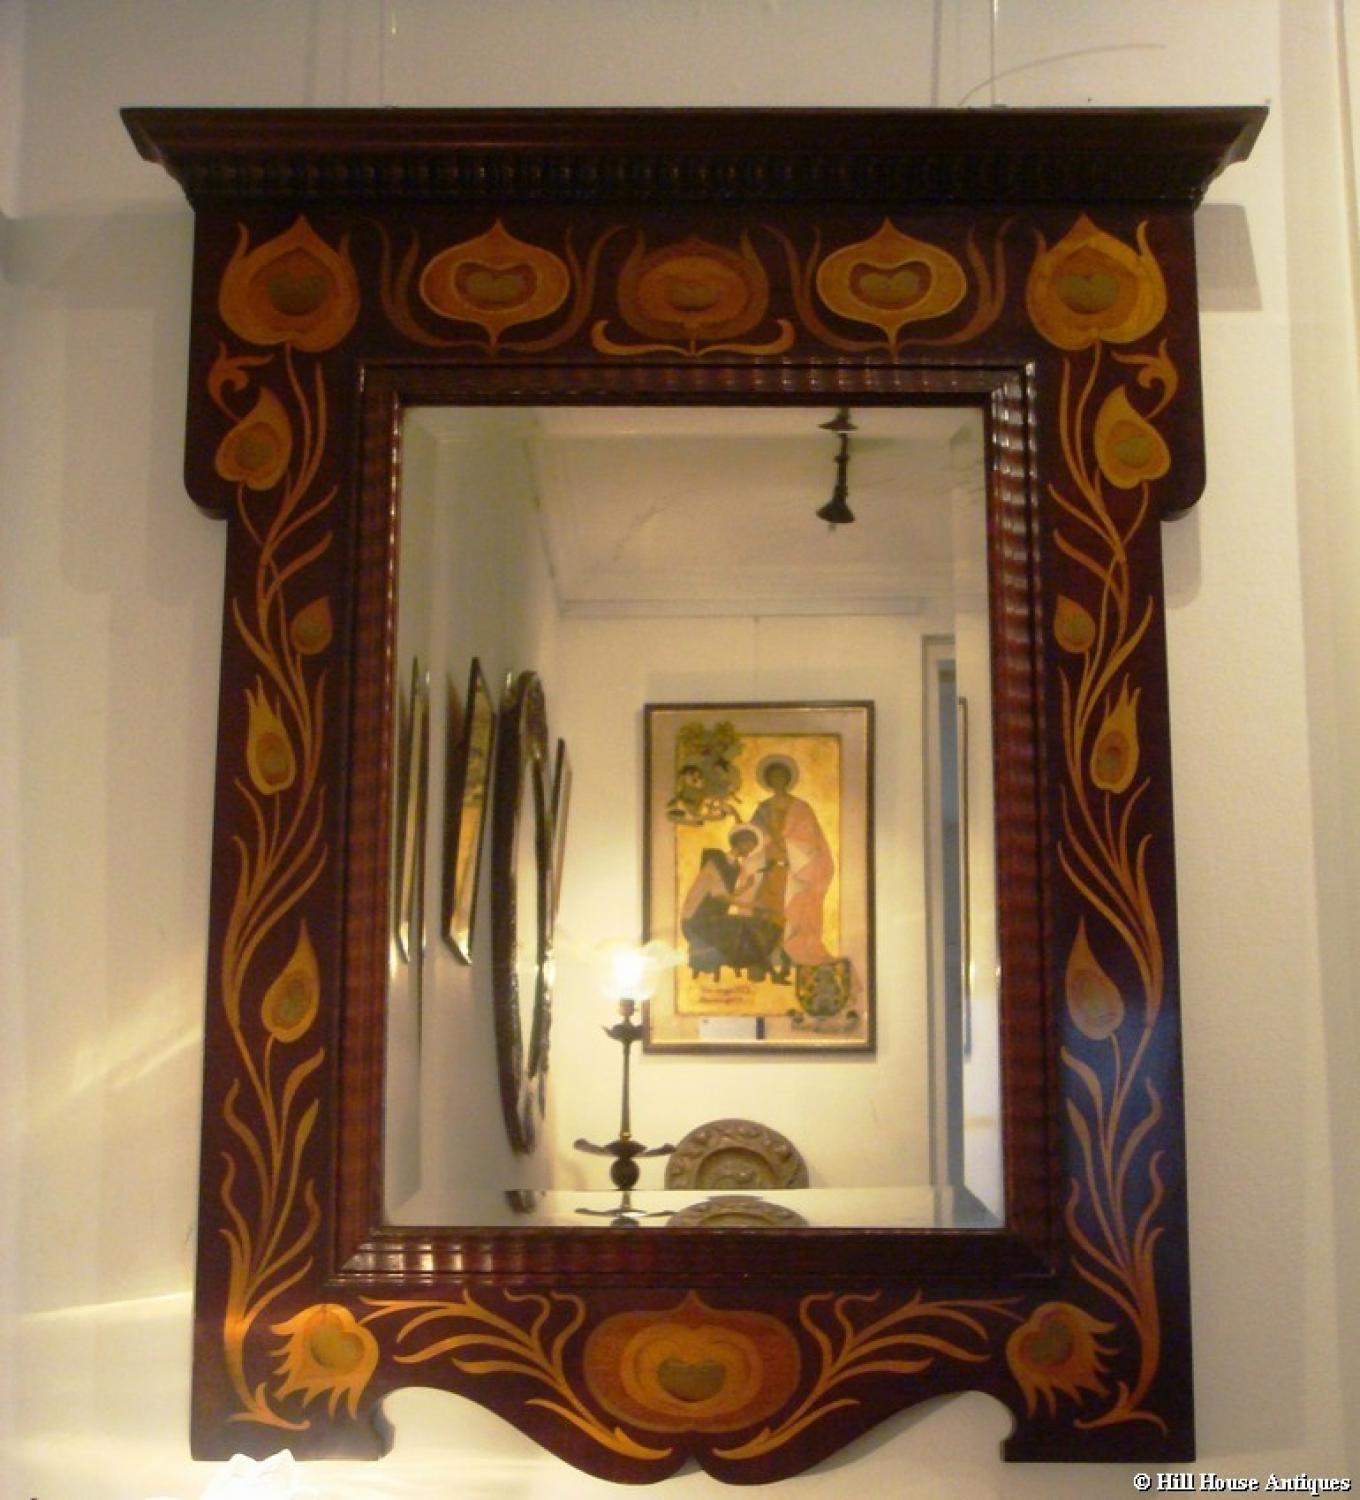 Rare Shapland & Petter inlaid peacock mirror